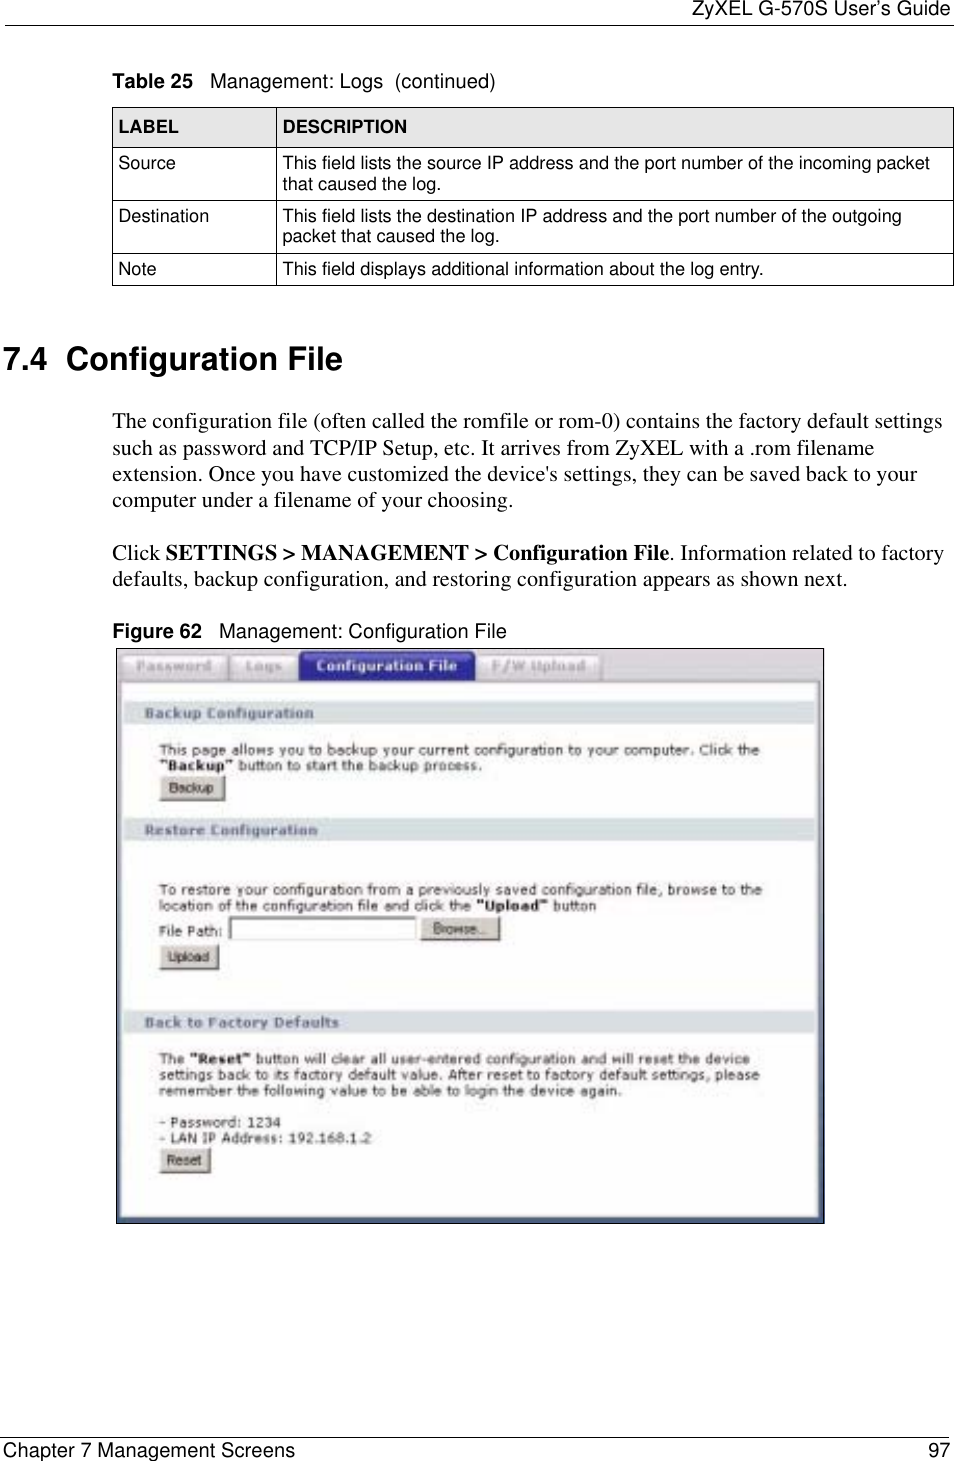 ZyXEL G-570S User’s GuideChapter 7 Management Screens 977.4  Configuration File The configuration file (often called the romfile or rom-0) contains the factory default settings such as password and TCP/IP Setup, etc. It arrives from ZyXEL with a .rom filename extension. Once you have customized the device&apos;s settings, they can be saved back to your computer under a filename of your choosing. Click SETTINGS &gt; MANAGEMENT &gt; Configuration File. Information related to factory defaults, backup configuration, and restoring configuration appears as shown next.Figure 62   Management: Configuration FileSource This field lists the source IP address and the port number of the incoming packet that caused the log.Destination  This field lists the destination IP address and the port number of the outgoing packet that caused the log.Note This field displays additional information about the log entry.Table 25   Management: Logs  (continued)LABEL DESCRIPTION